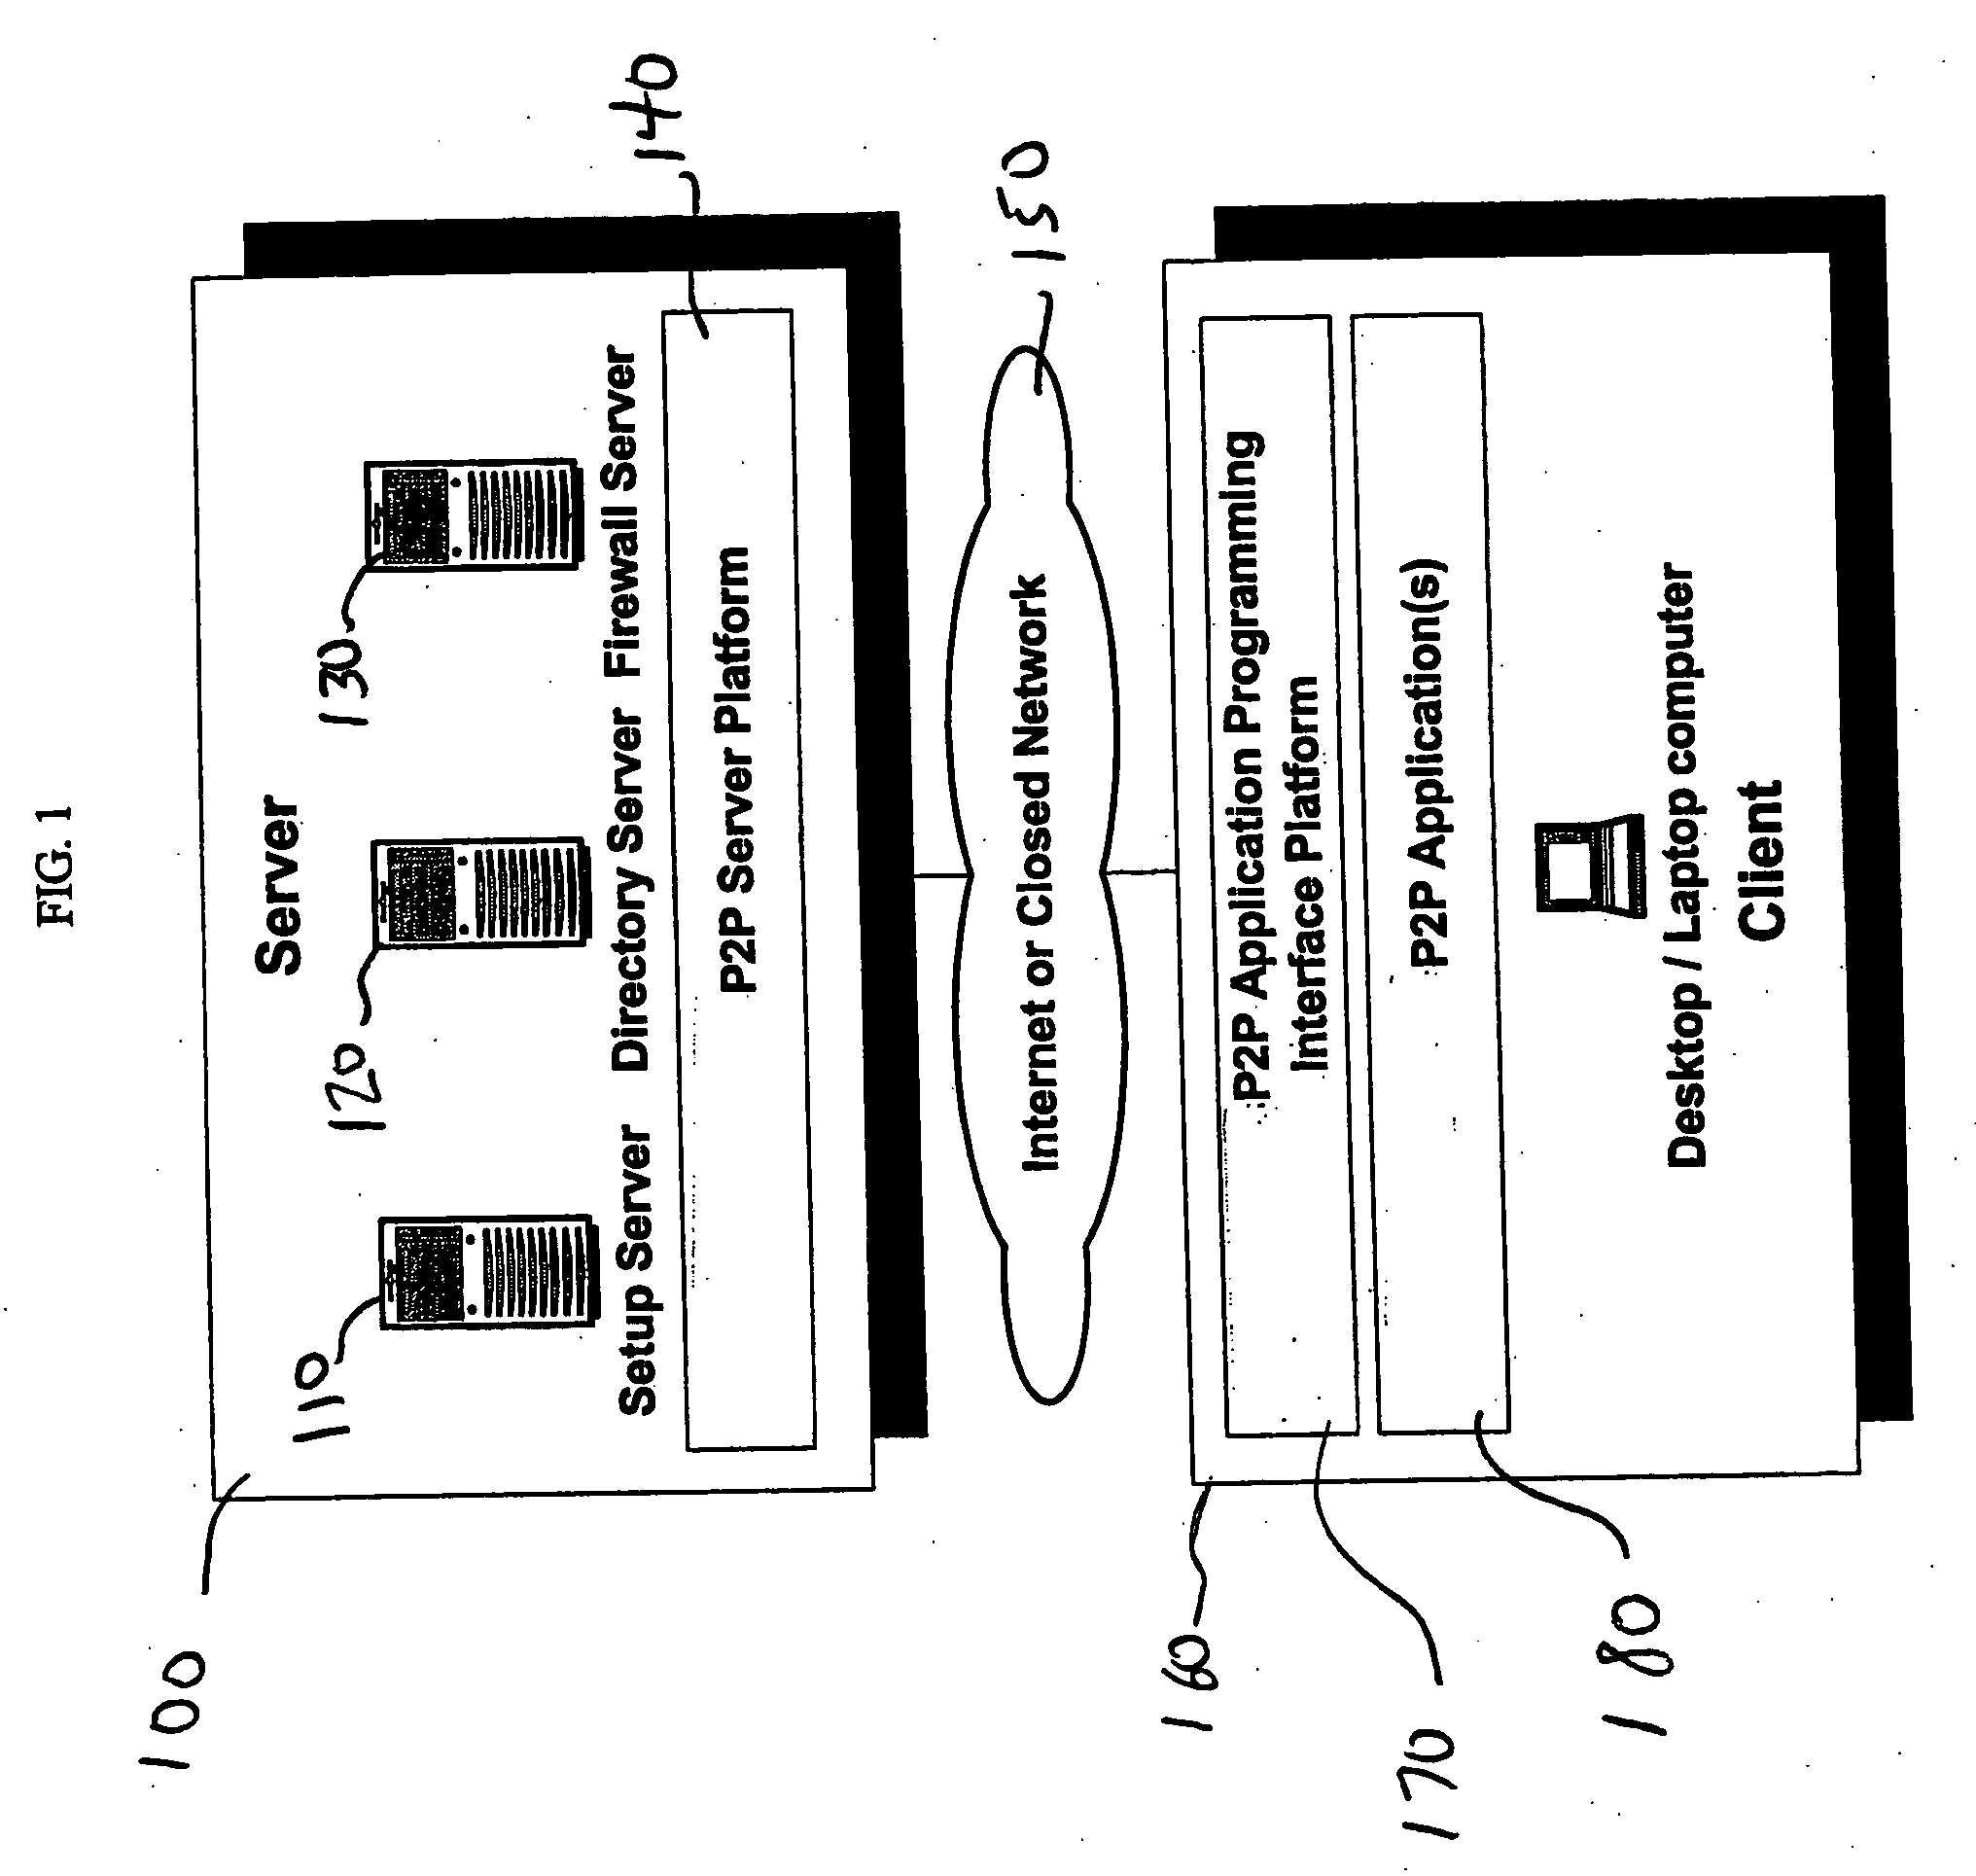 System and method for providing peer-to-peer communication